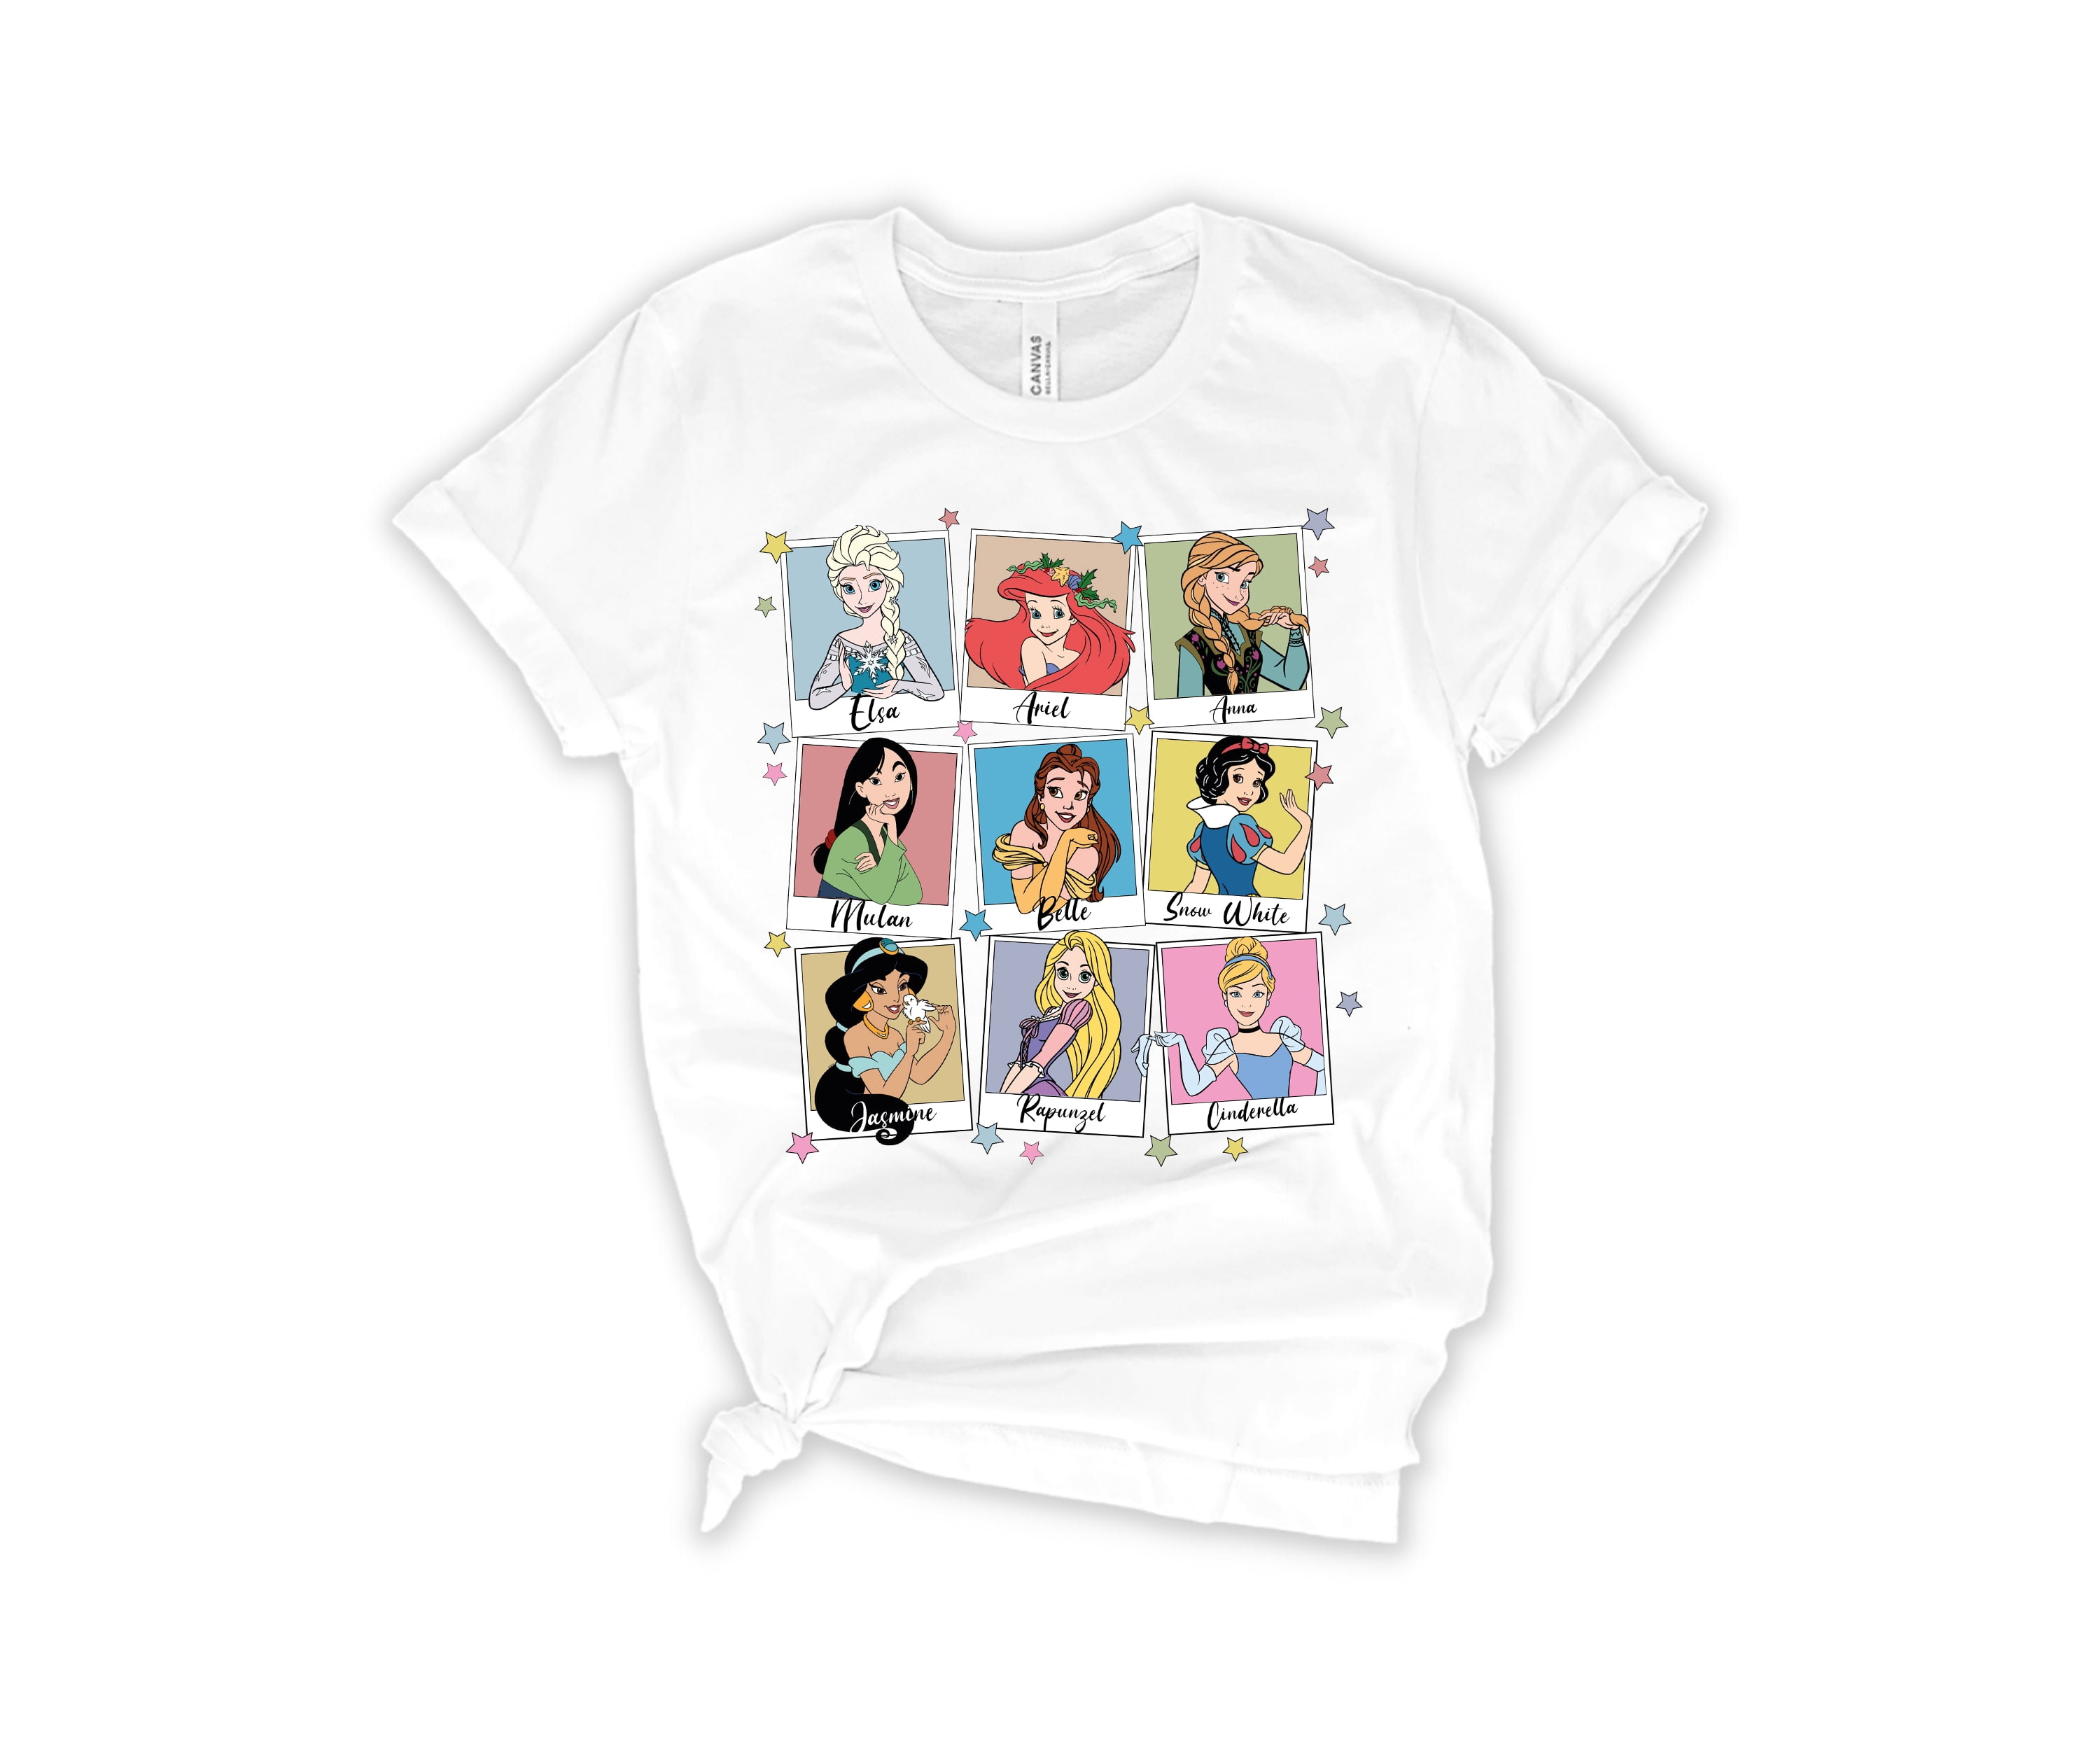 Cotton Sleeve Shirt Short of Ariel Dreams An Little - Disney Ocean Adults Heather for T- Mermaid Customized-Athletic - The